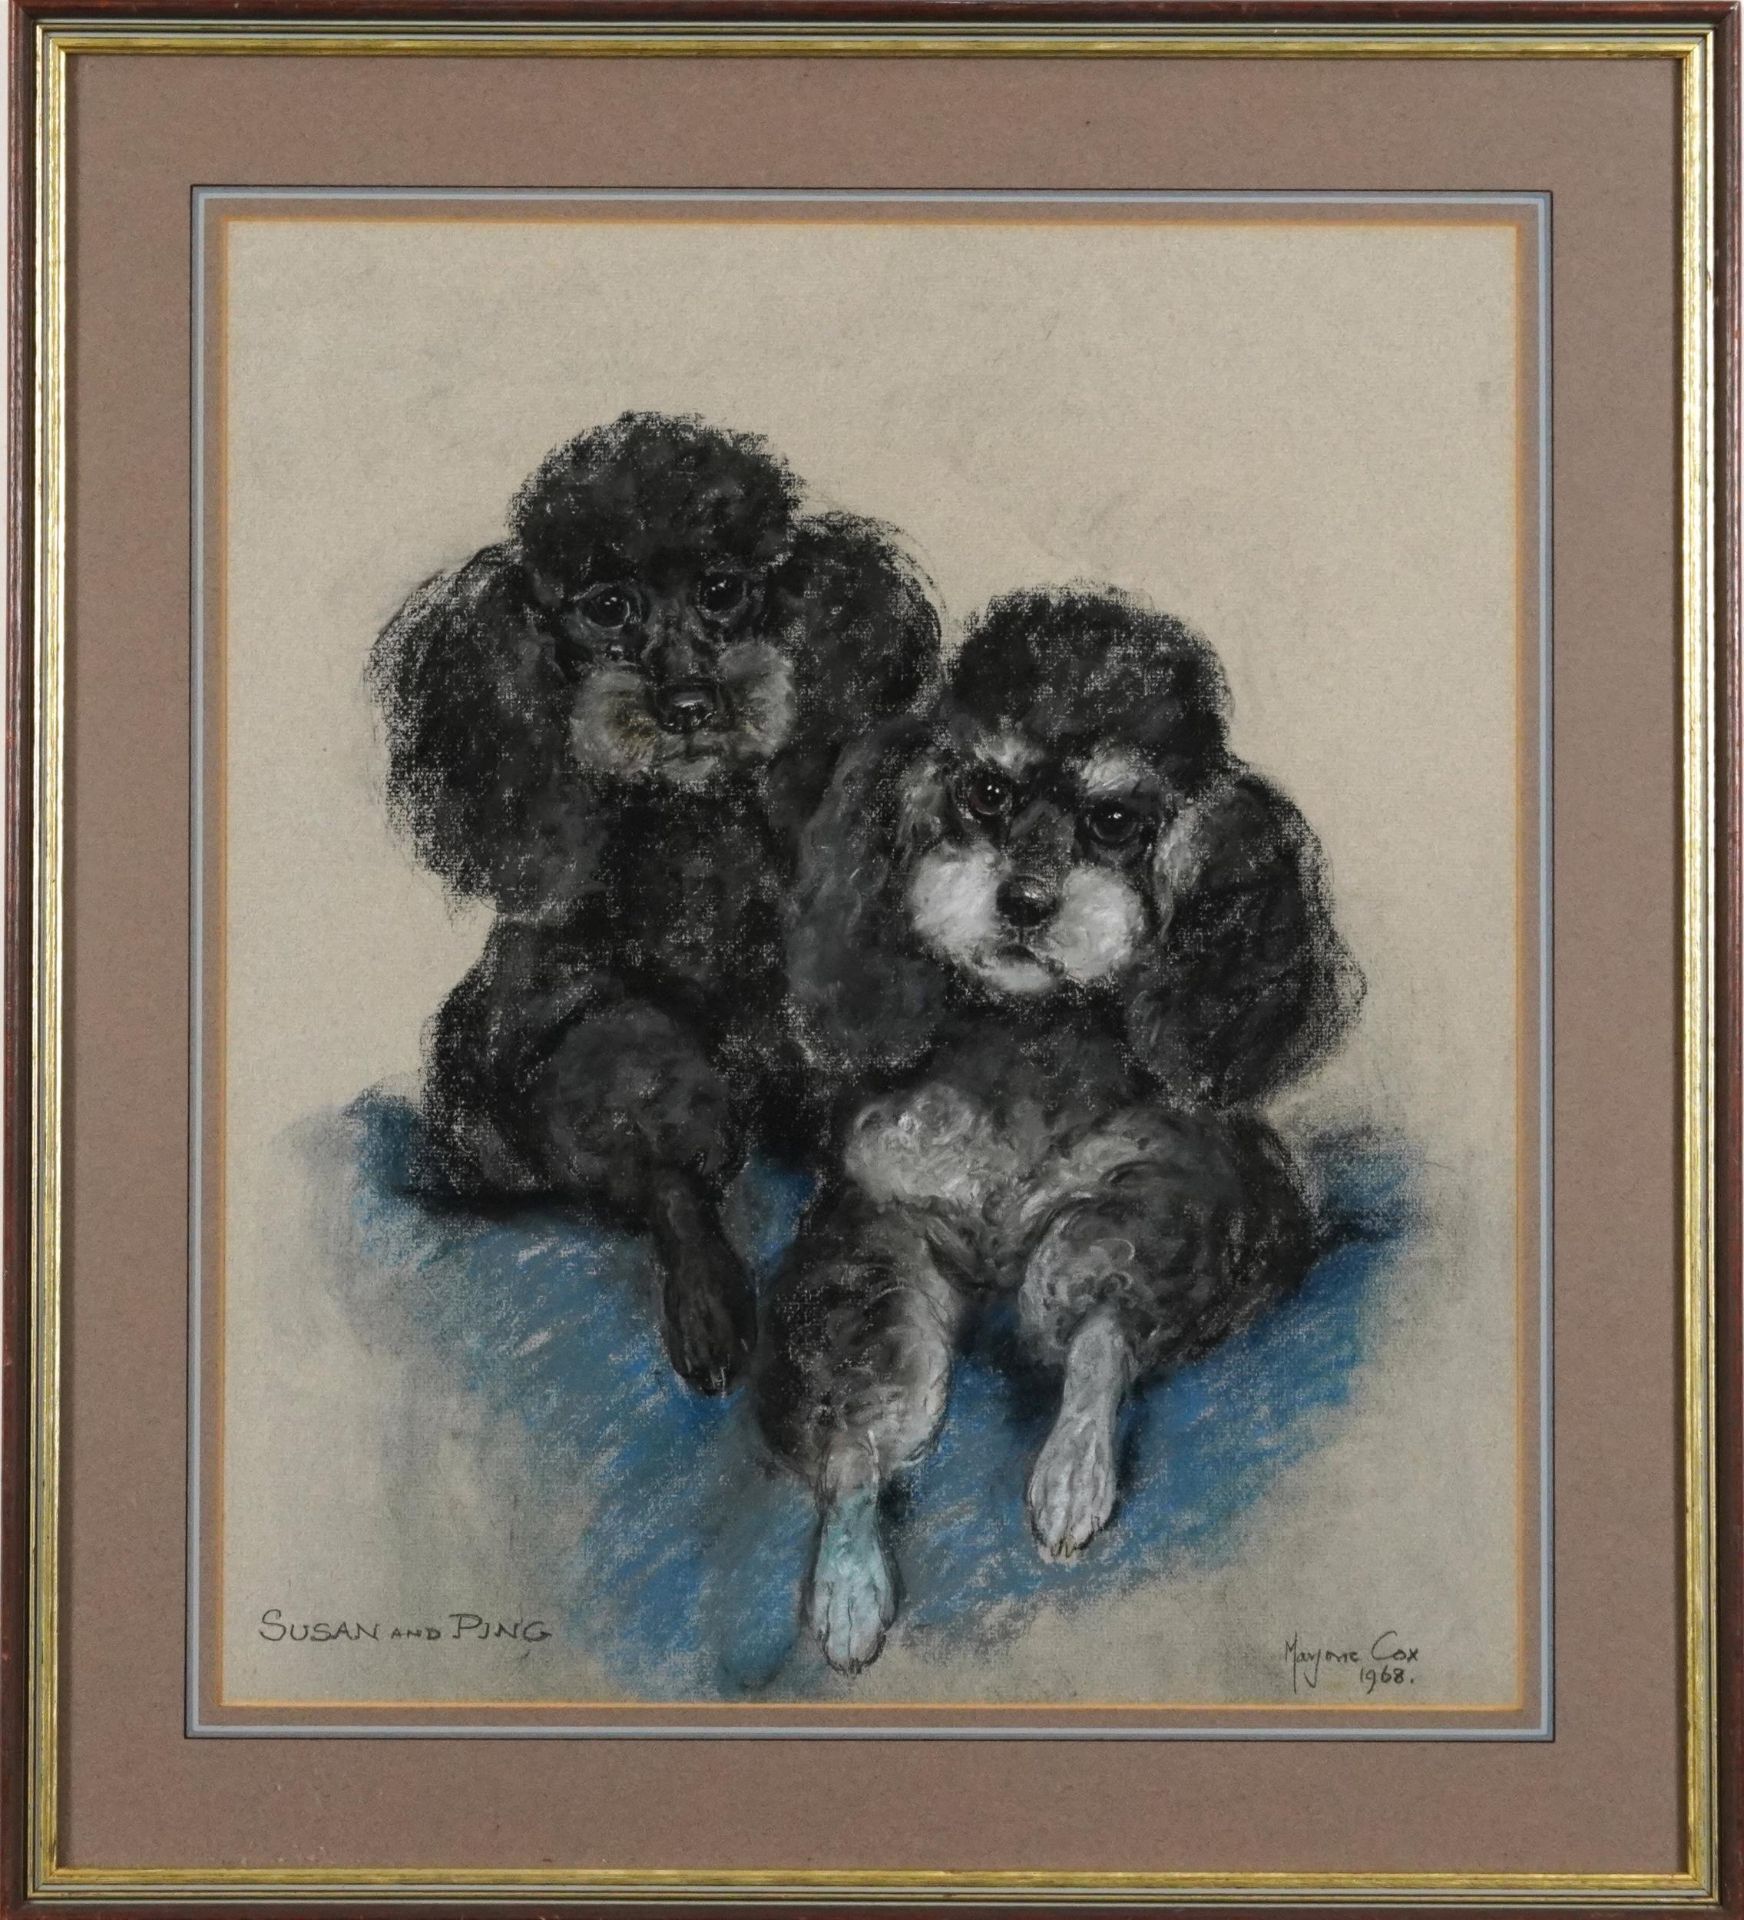 Marjorie Cox 1968 - Portrait of two Poodles called Susan & Ping, signed pastel, mounted, framed - Image 2 of 4